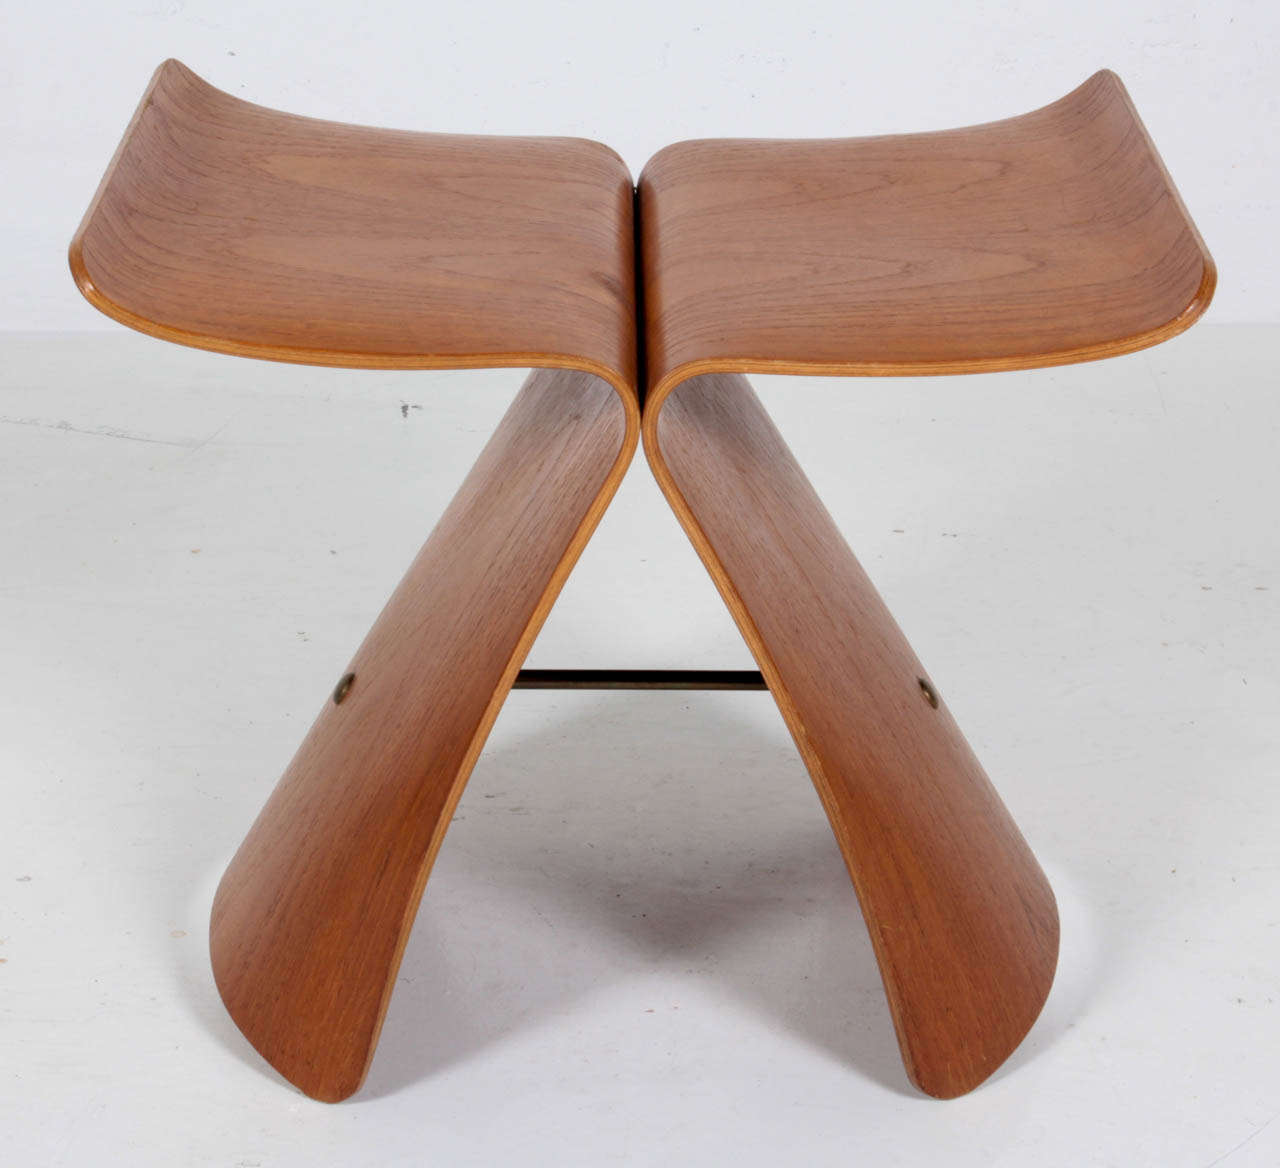 Sori Yanagi (1915-2012), Japan.
Tendo Co. Ltd., Japan.

Butterfly stool, 1956.

Bleached rosewood veneer on plywood with brass.

Measures: H 15” x W 16 ½” x D 12”. 

This model can be found in the collections of the Museum of Modern Art and